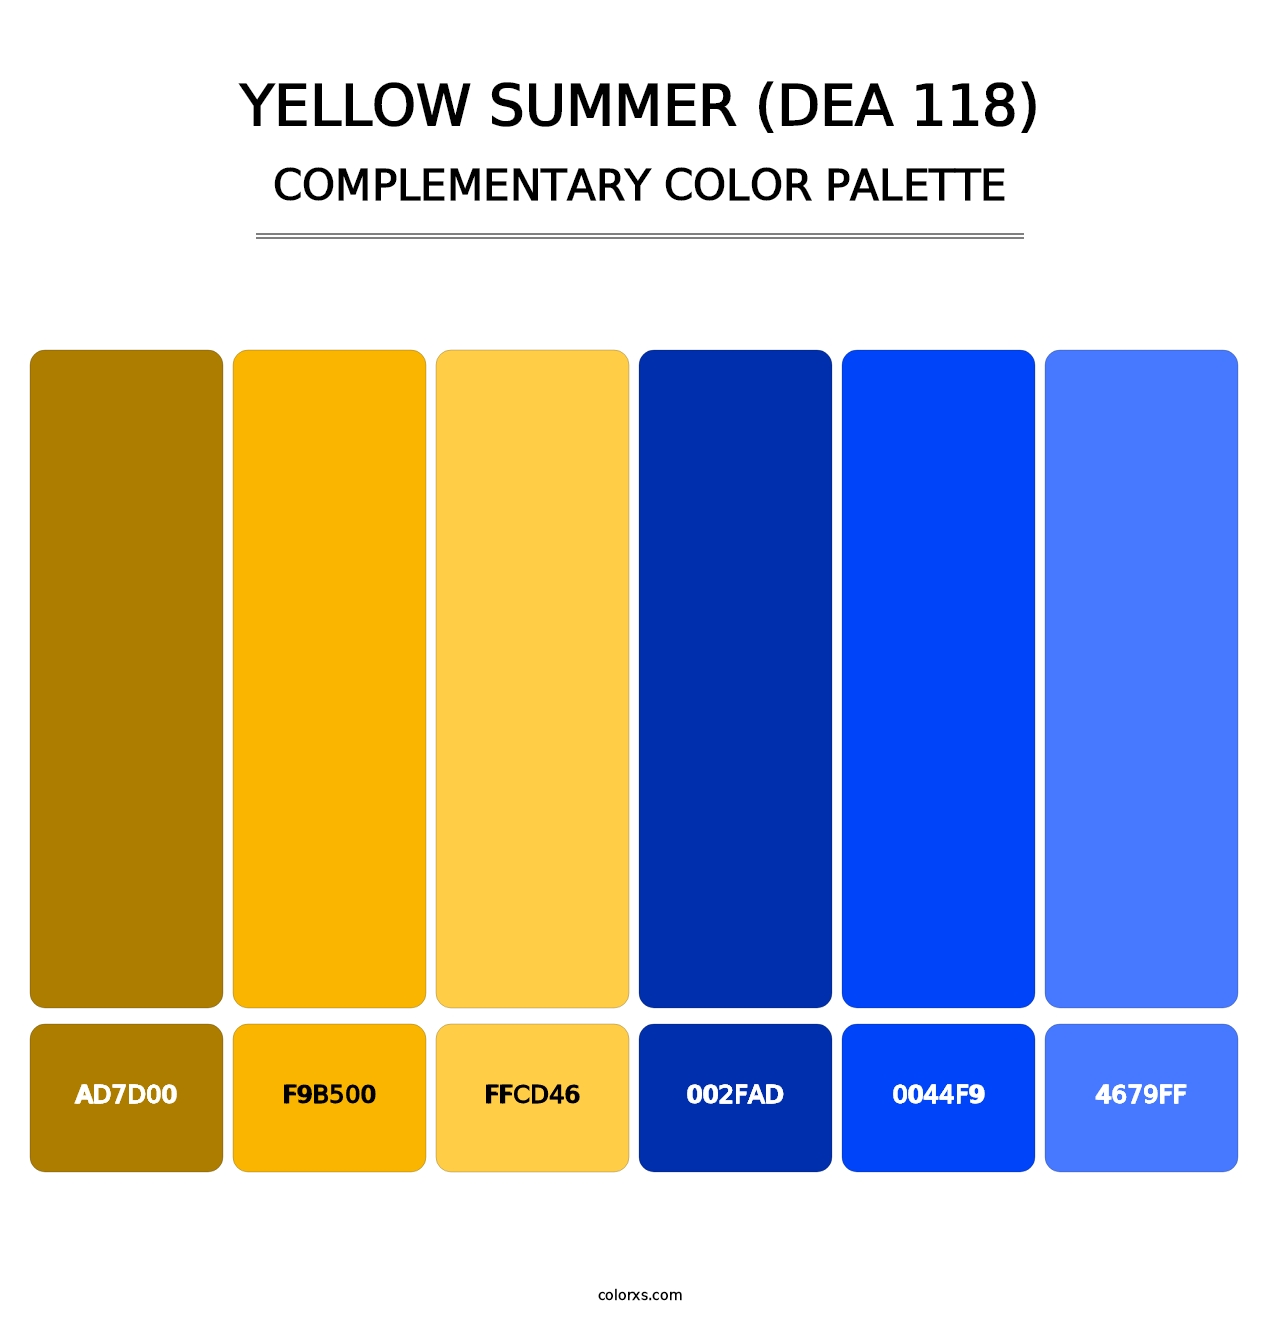 Yellow Summer (DEA 118) - Complementary Color Palette